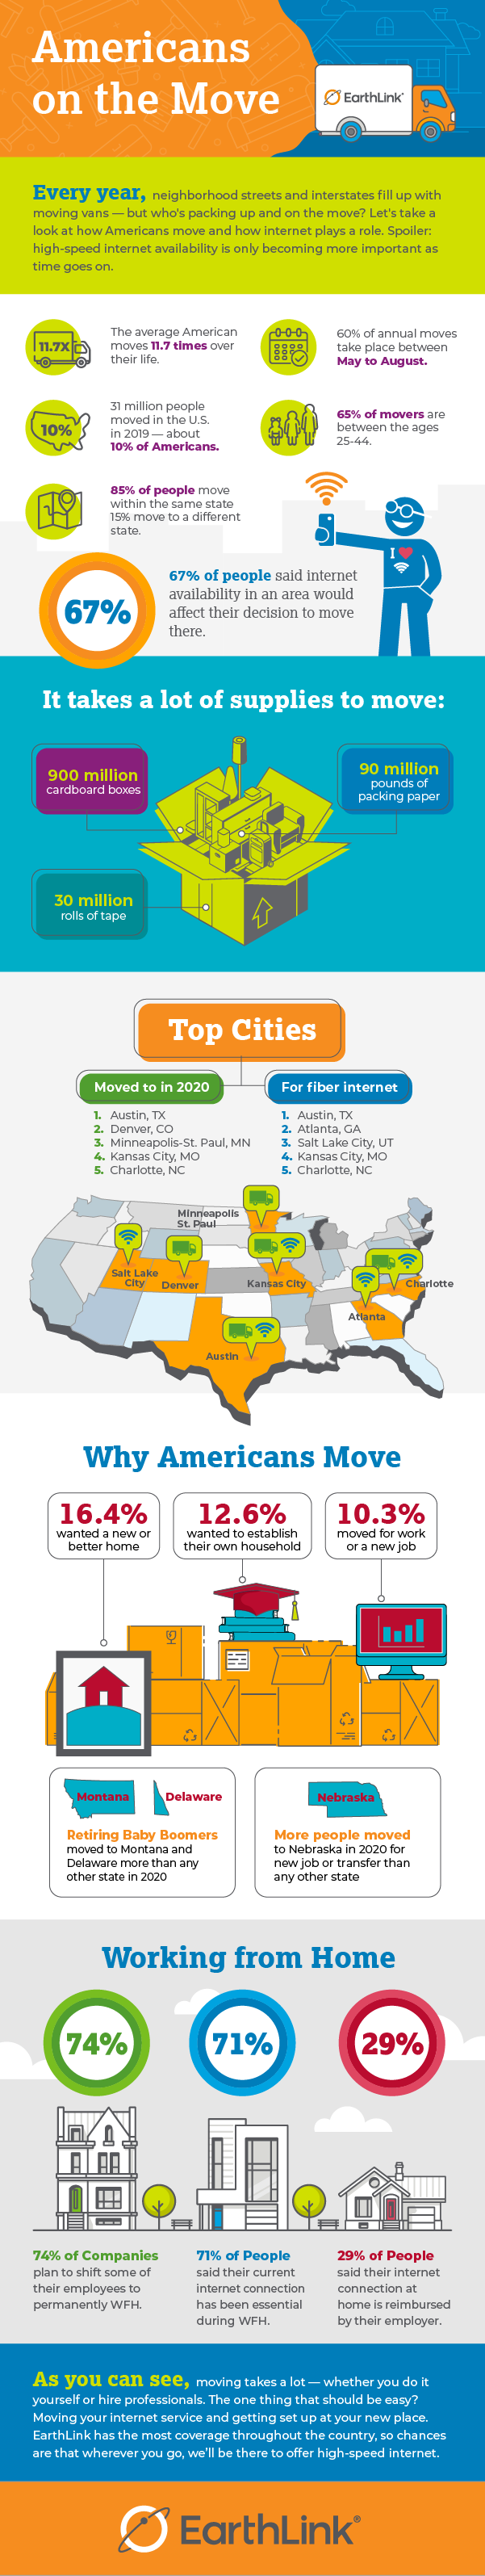 Infographic detailing moving trends